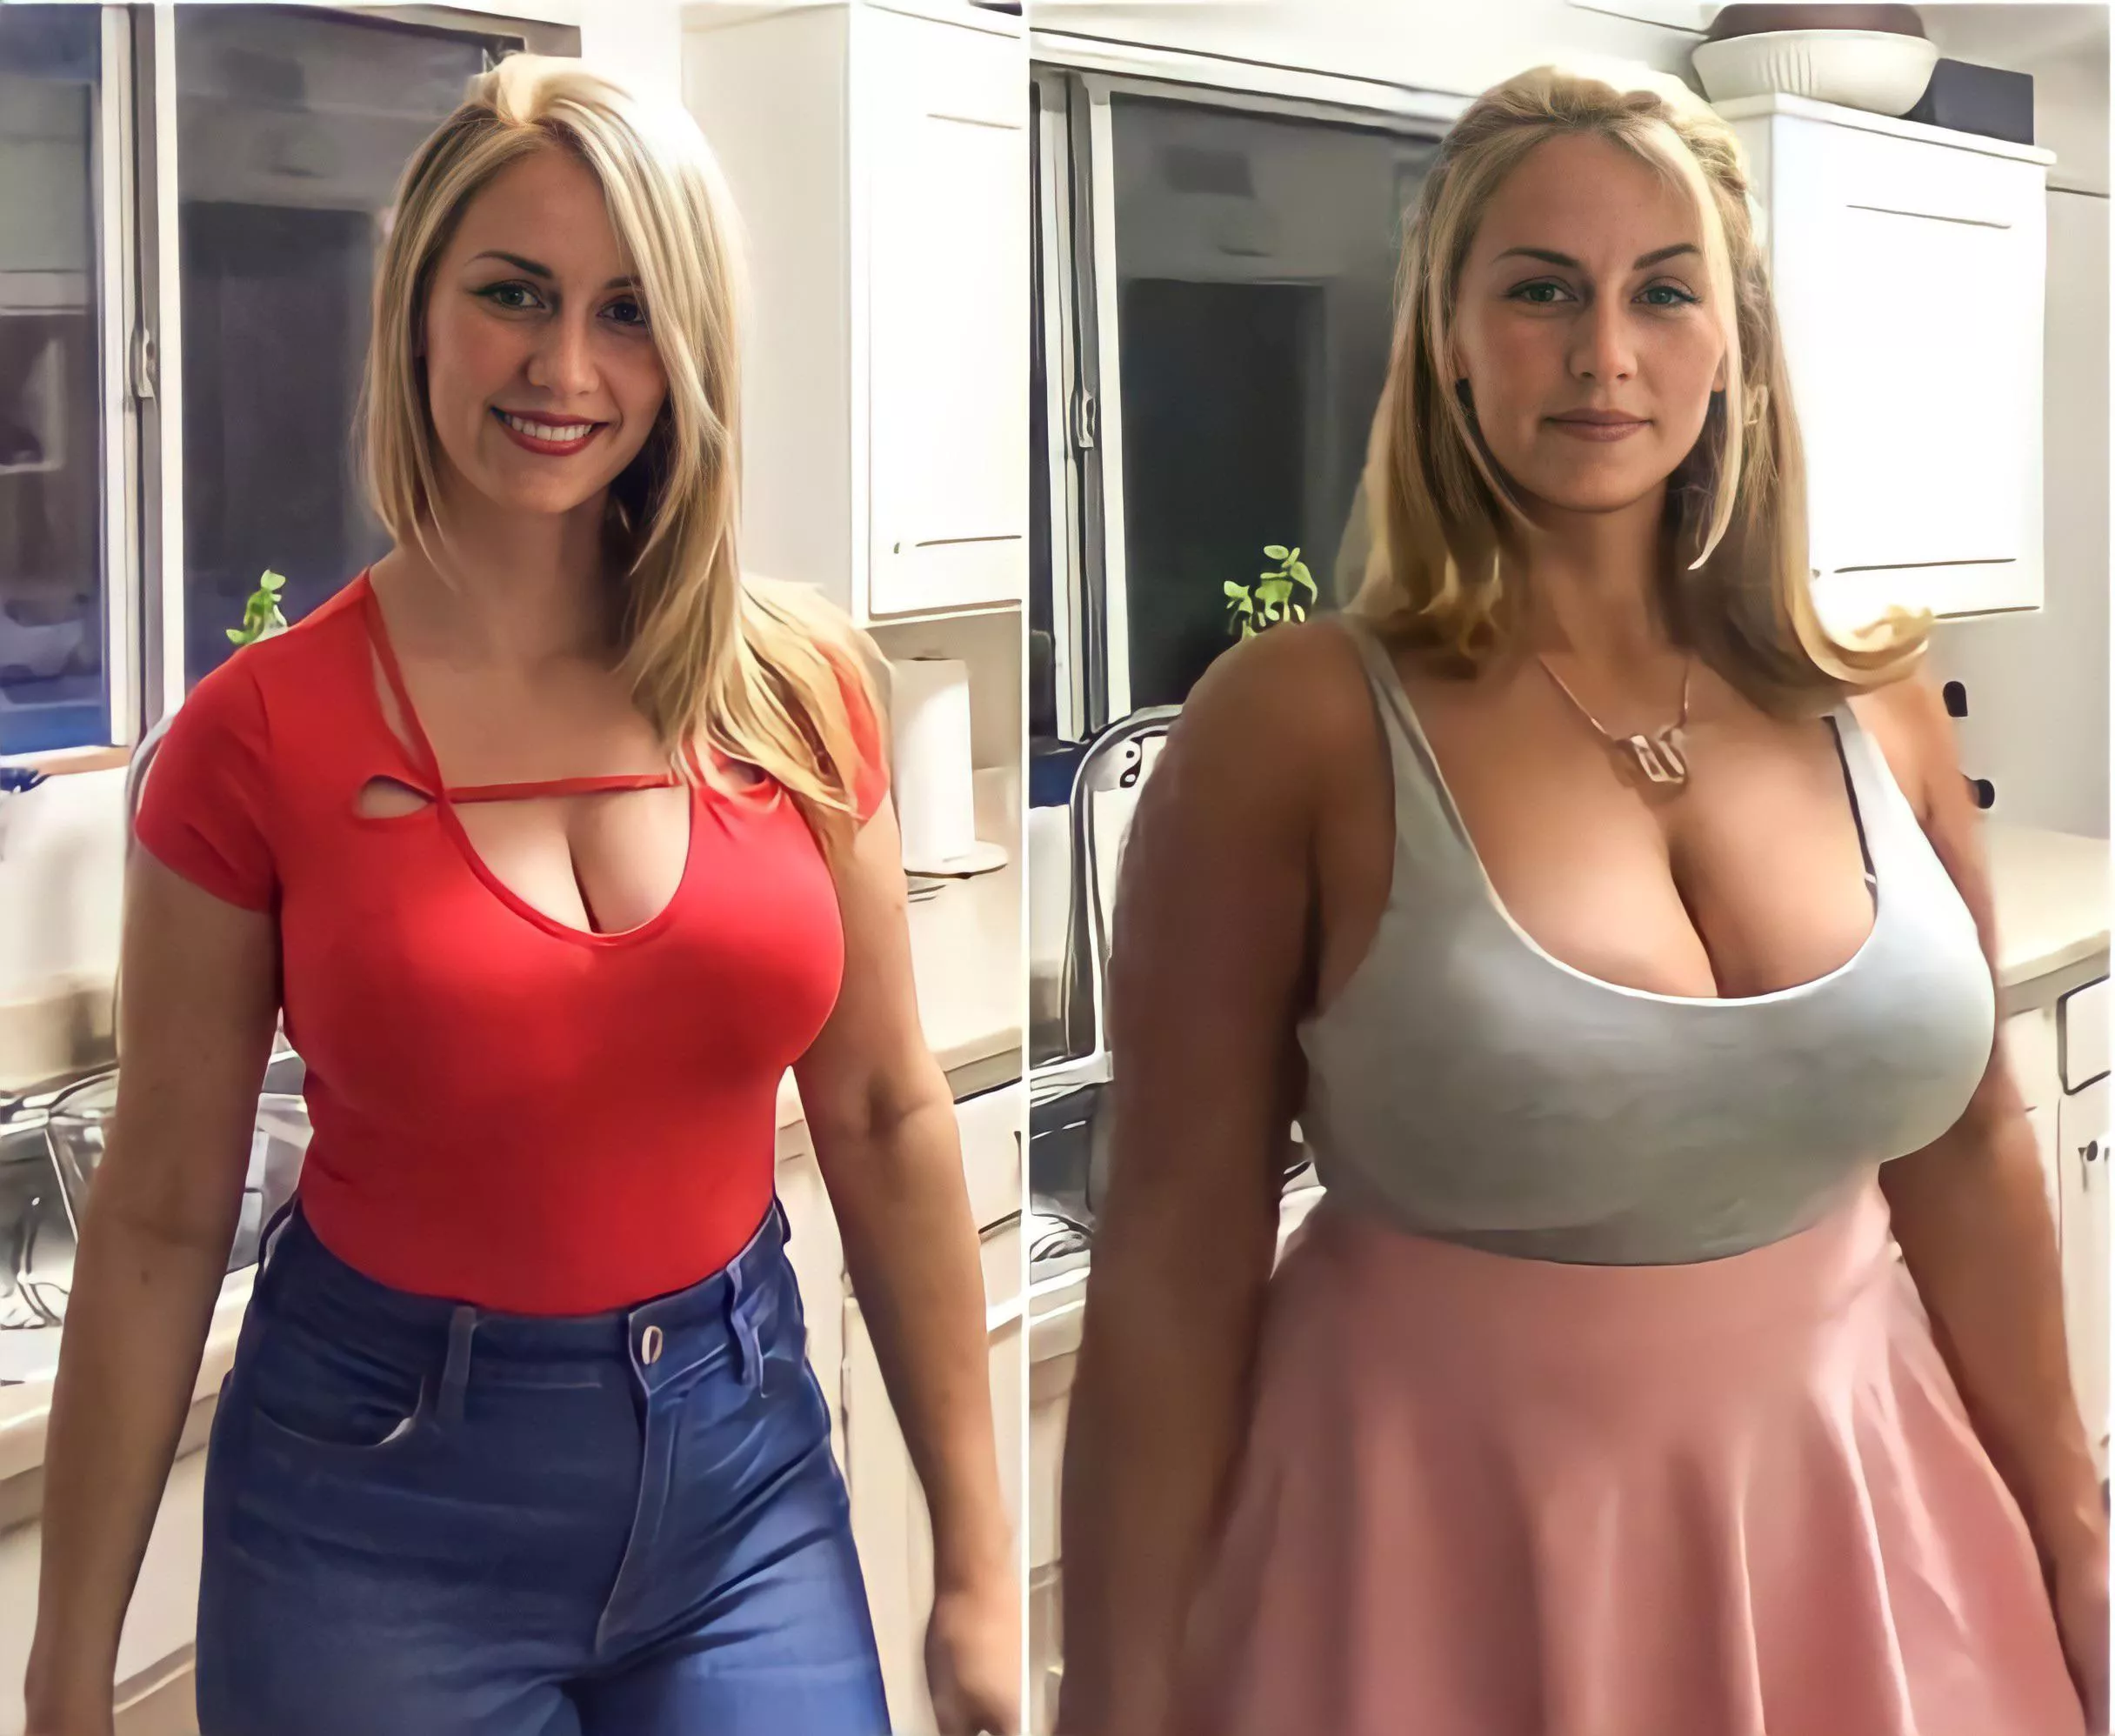 Are my boobs too big for my age